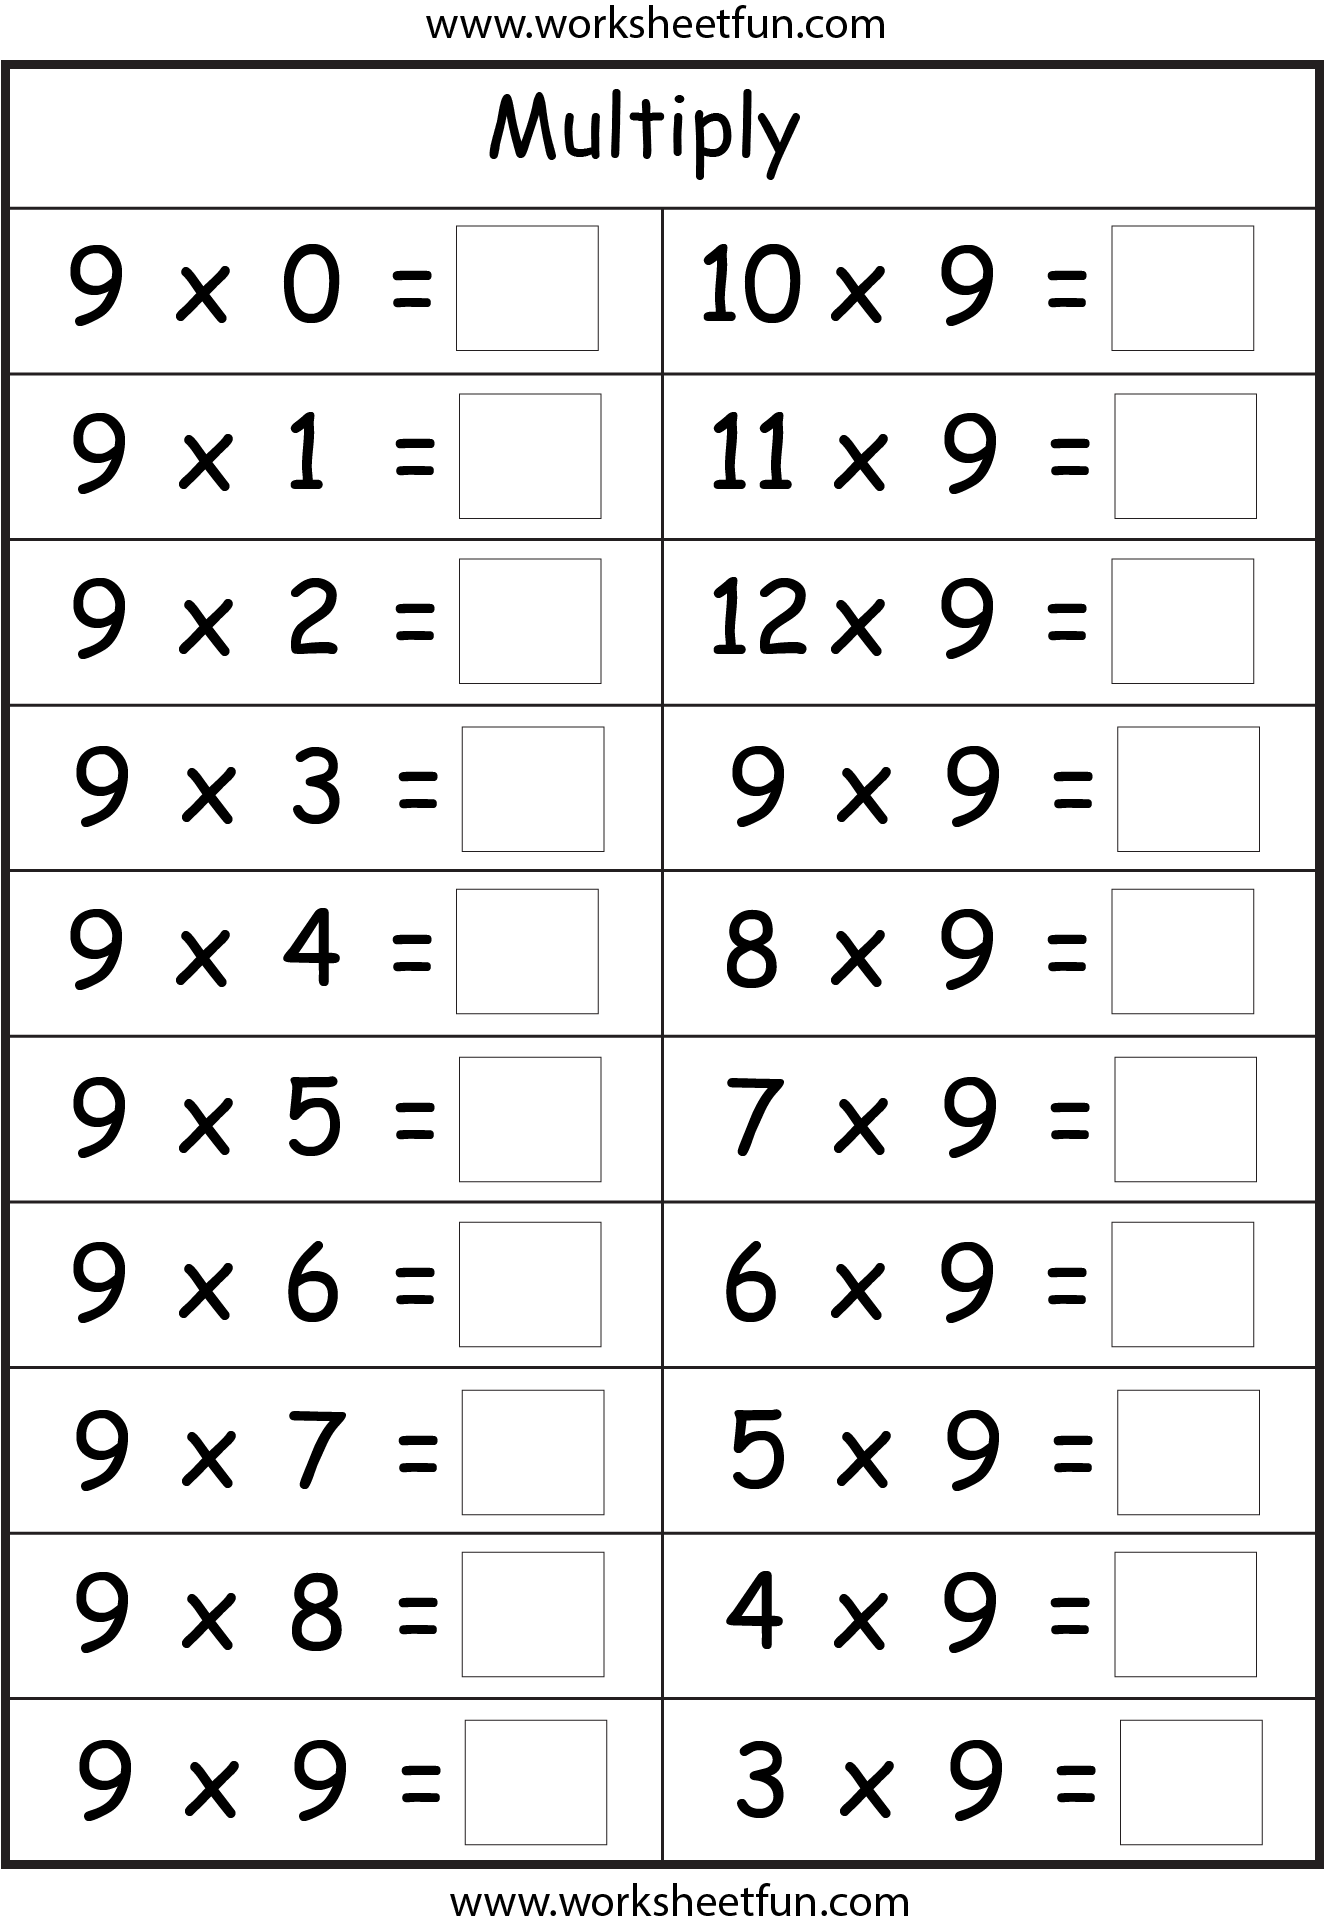 Multiplication Basic Facts 2, 3, 4, 5, 6, 7, 8 & 9 Times Tables